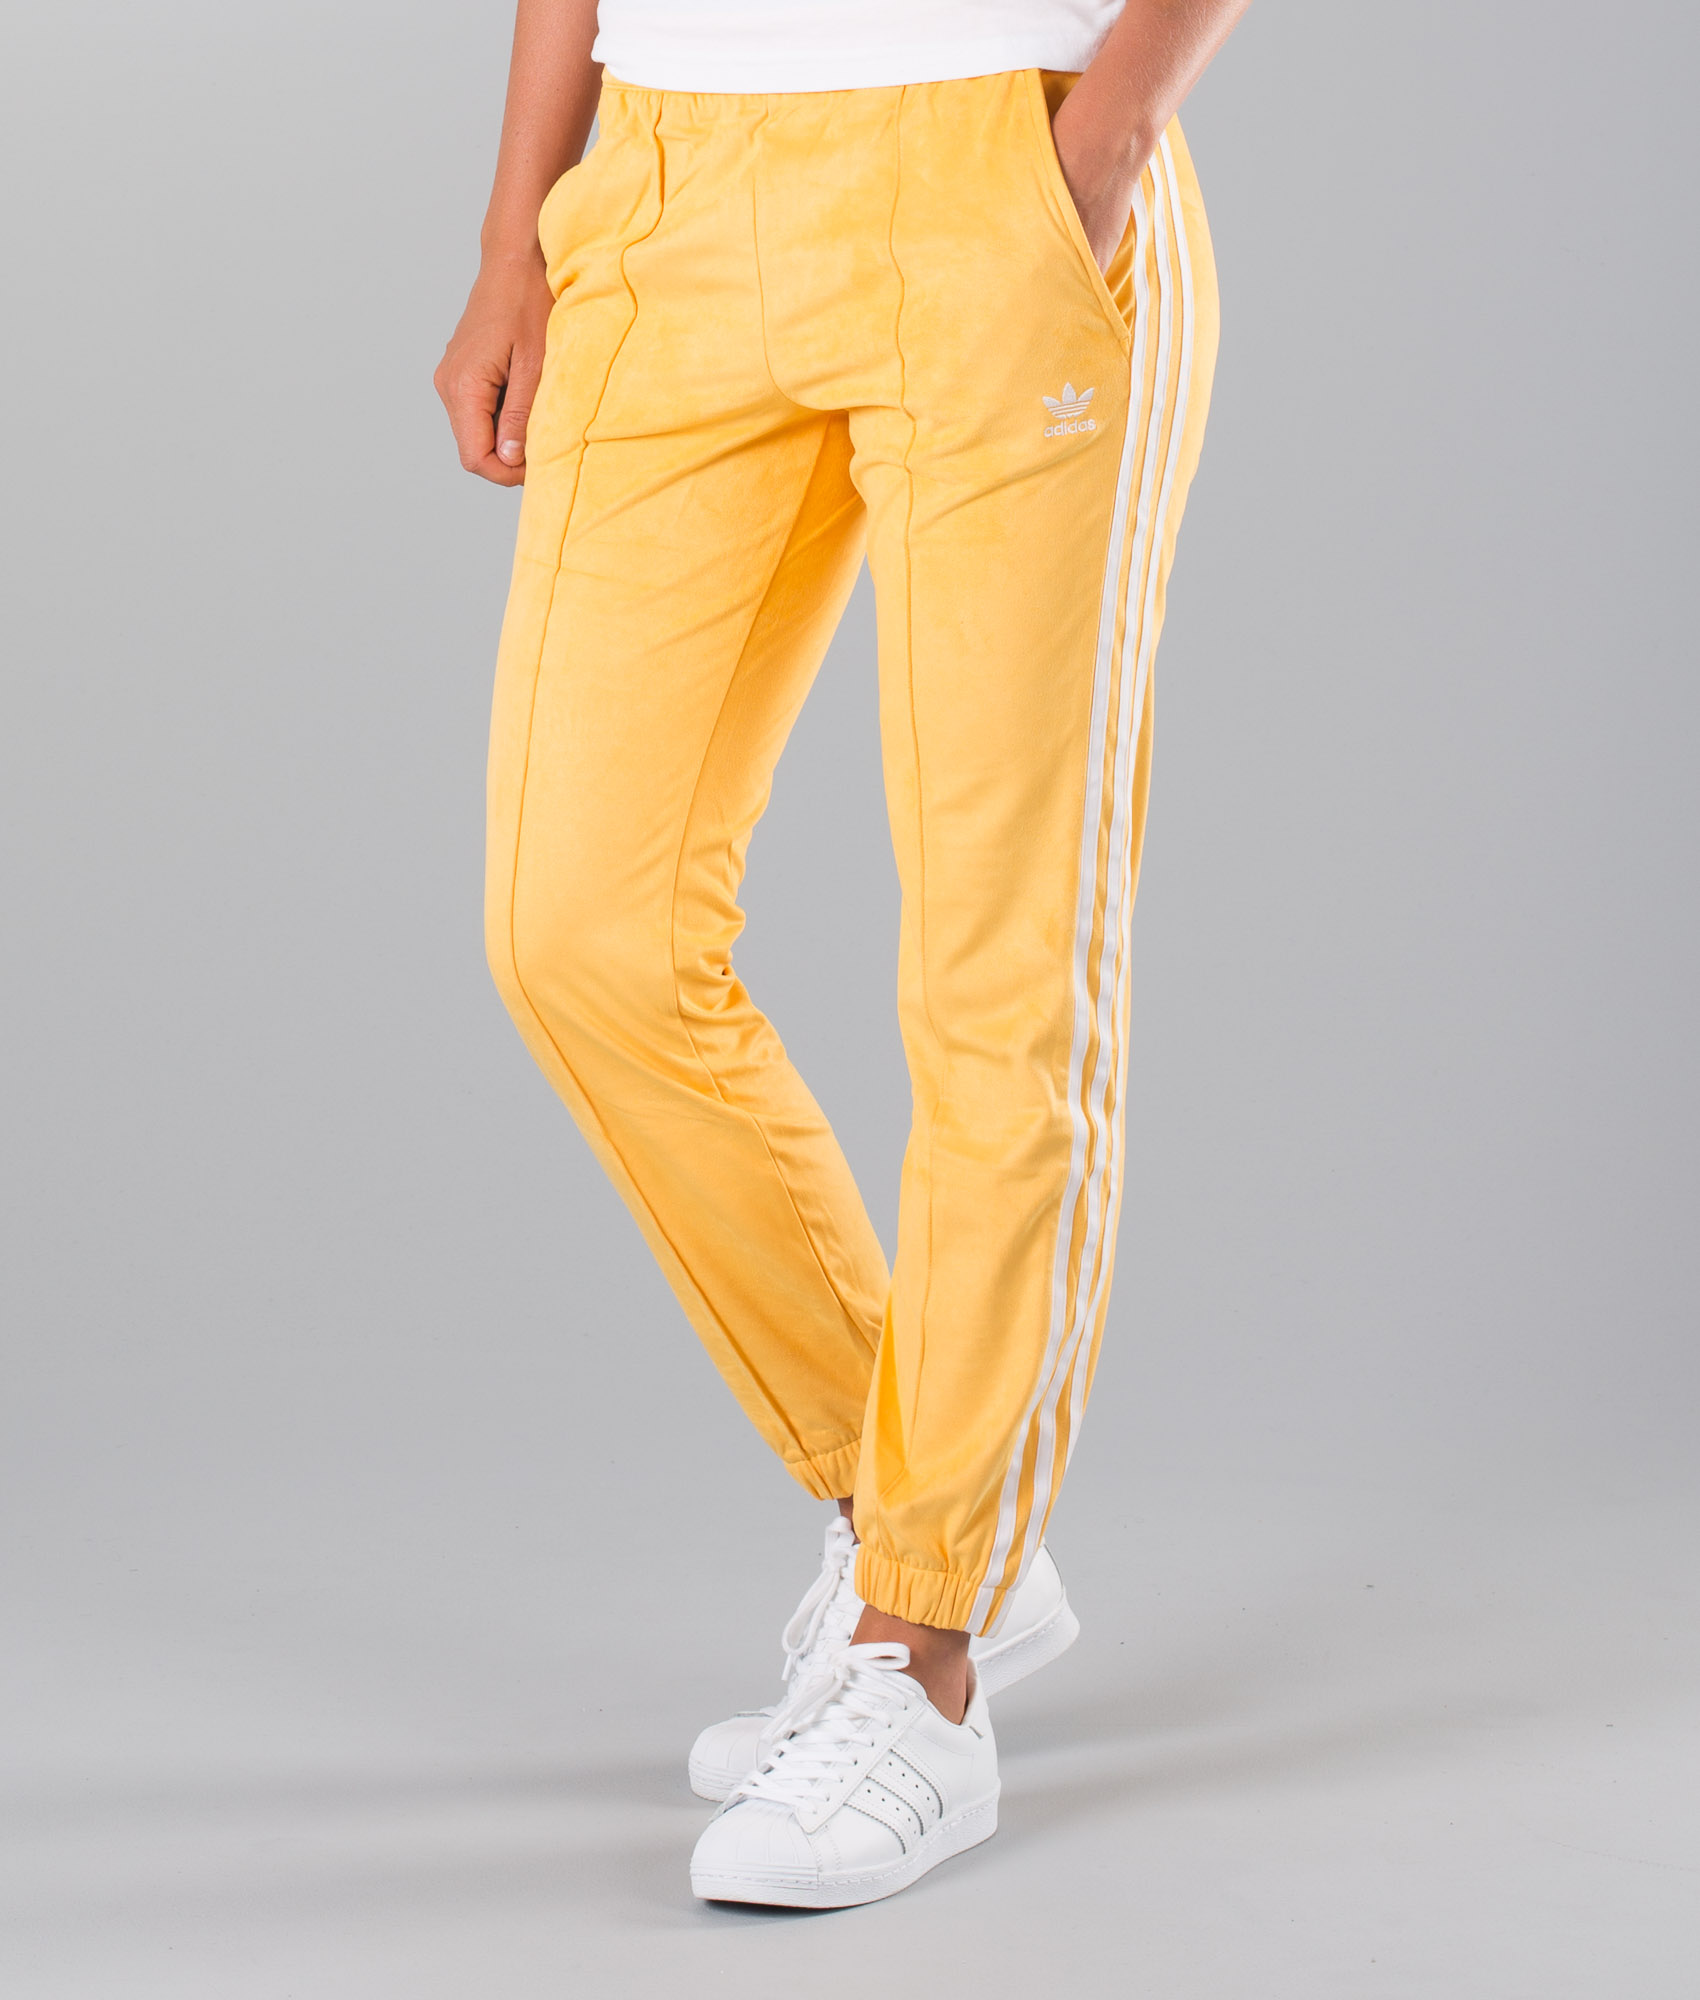 Green Adidas Tracksuit Pants Roblox Sale Off 62 - girls adidas track suit bottoms roblox